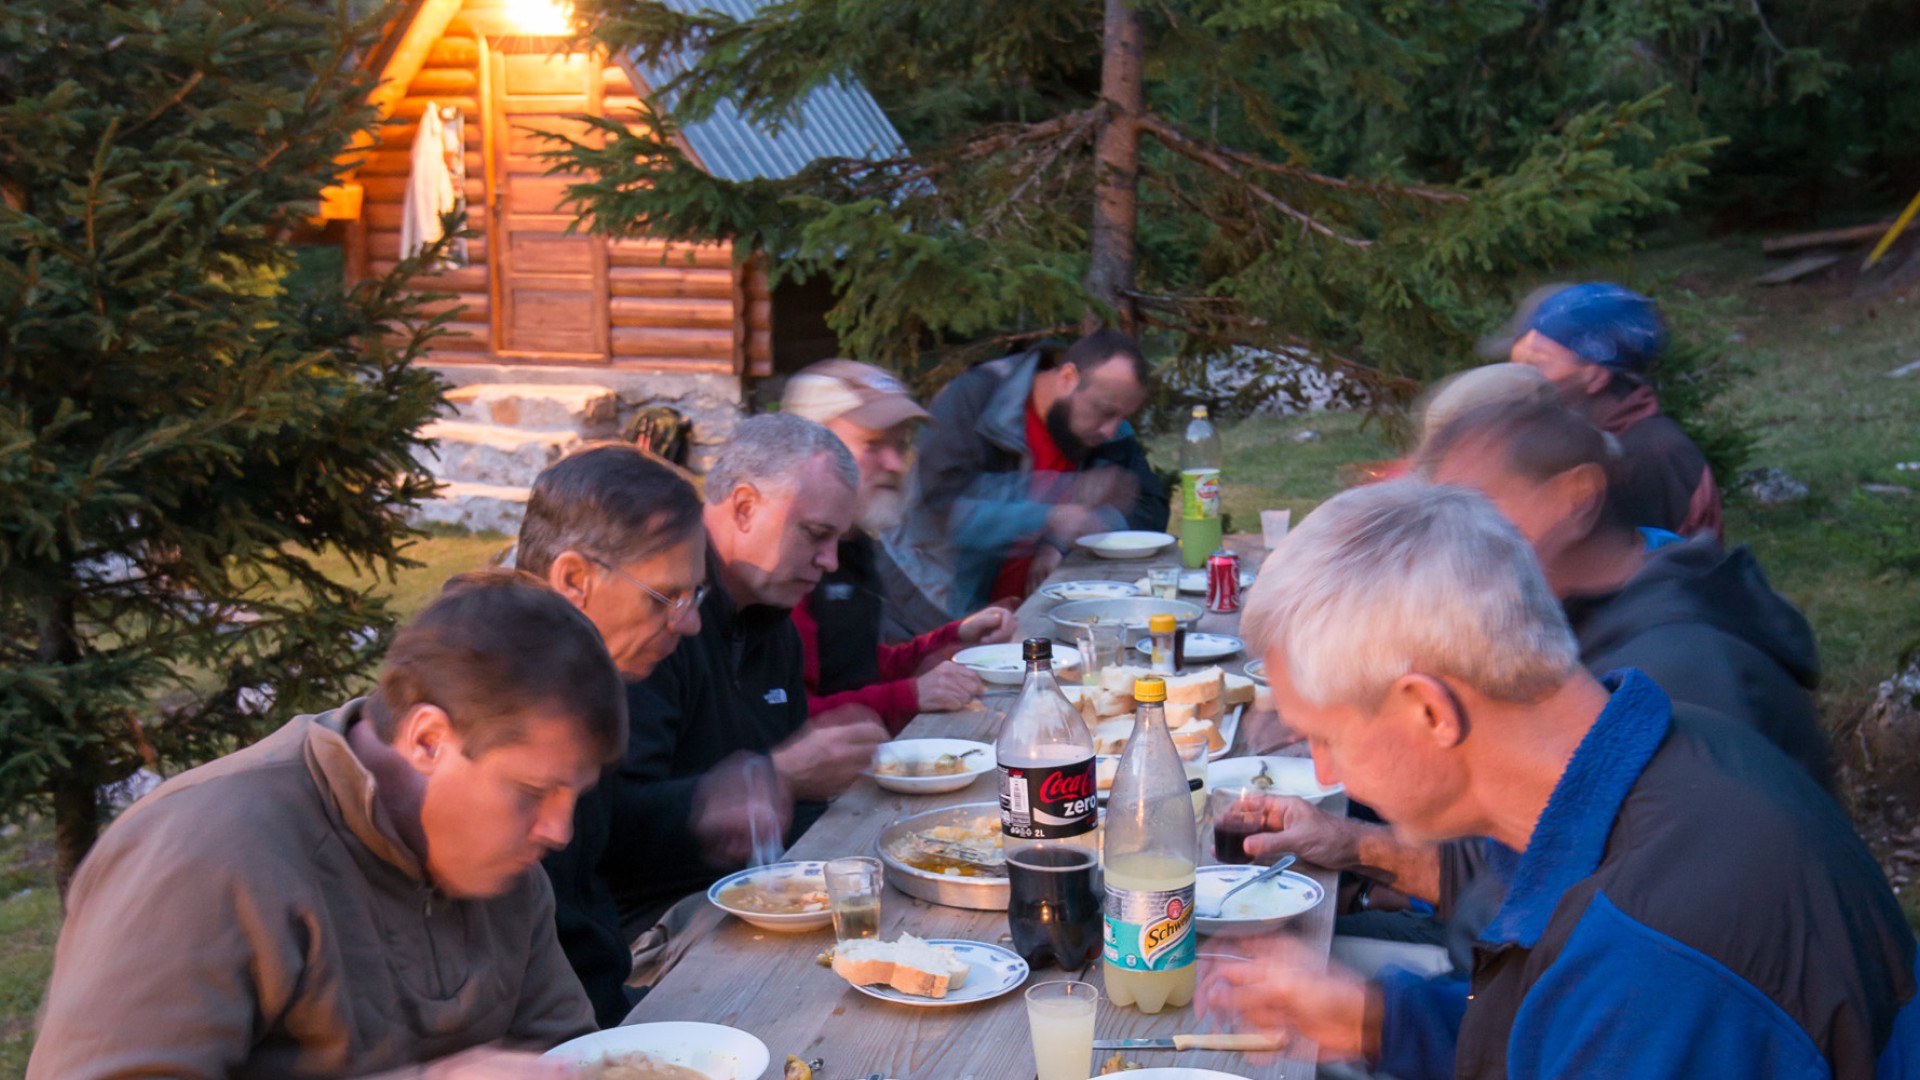 Group eating dinner at a picnic table in Albania